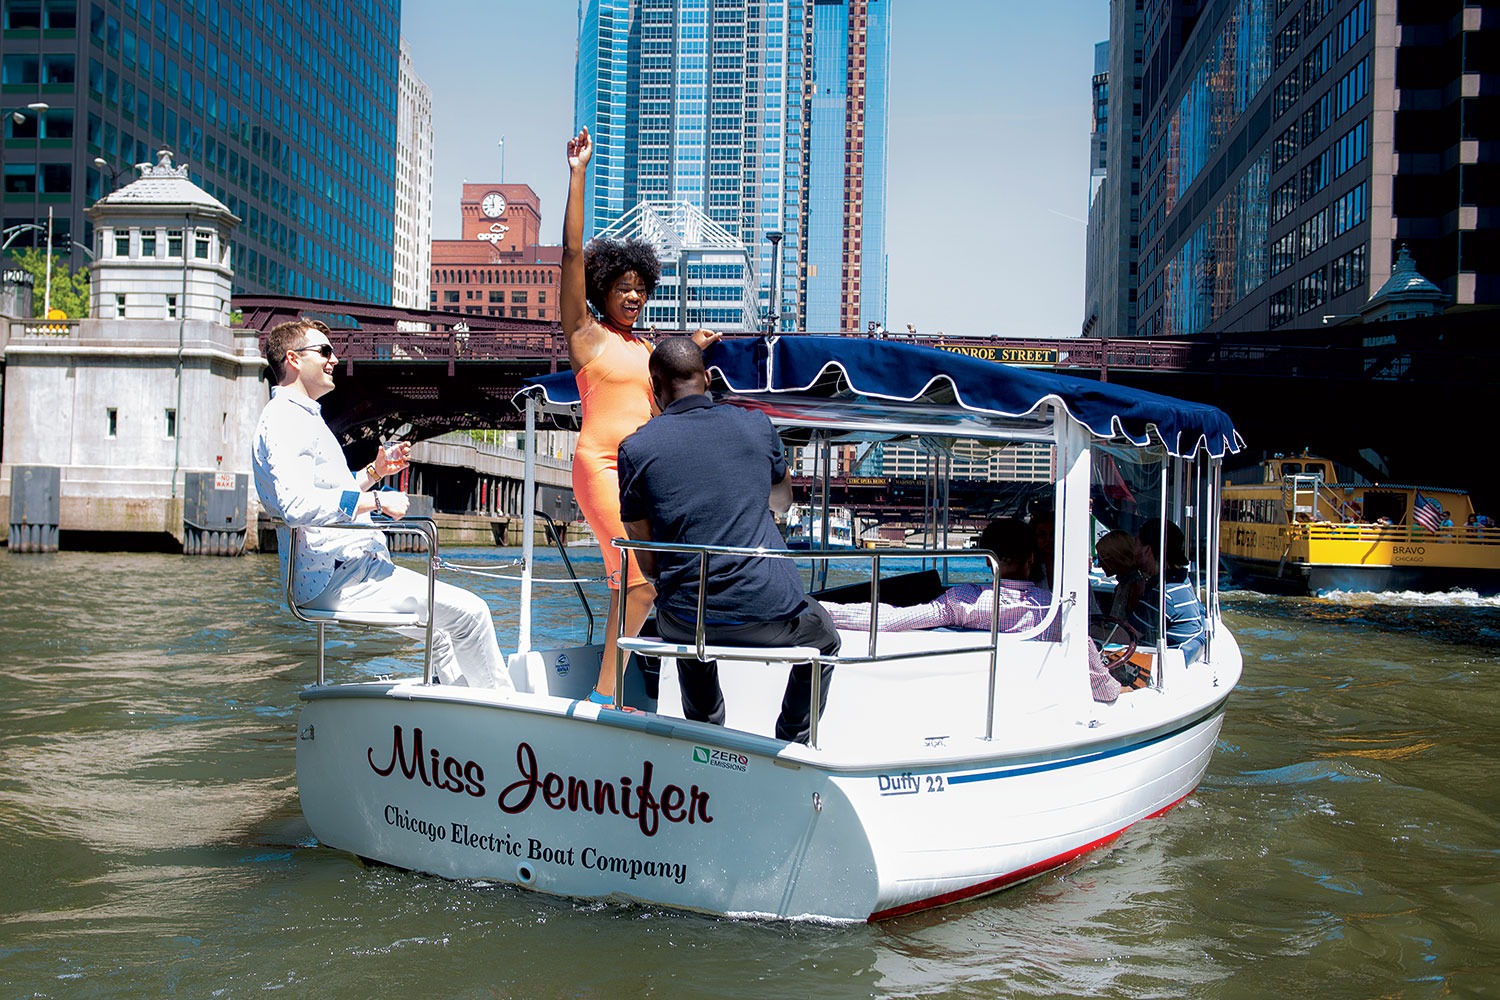 People on a boat in the Chicago River